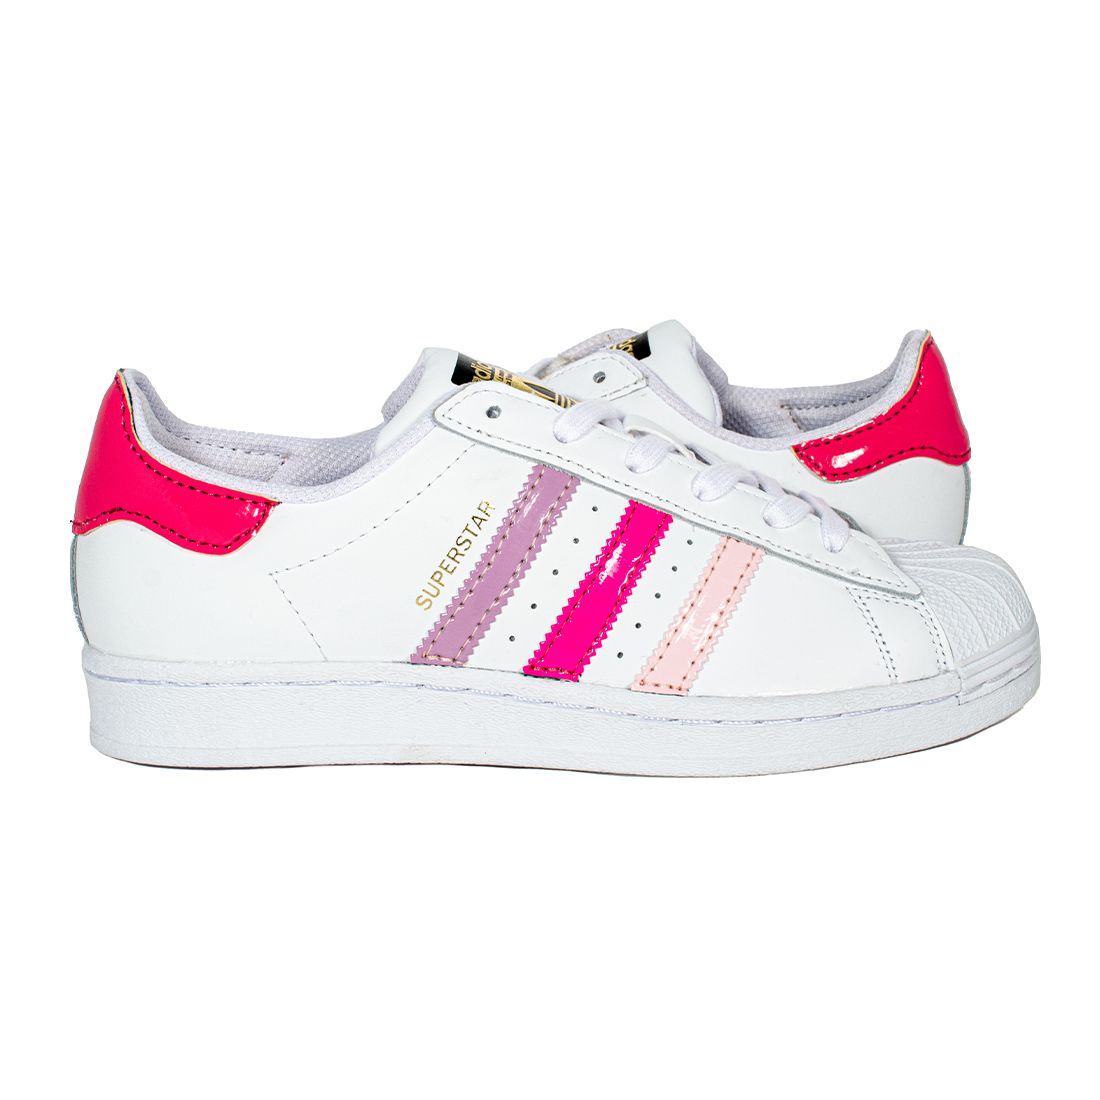 ADIDAS SUPERSTAR PERSONALIZZATE ADE